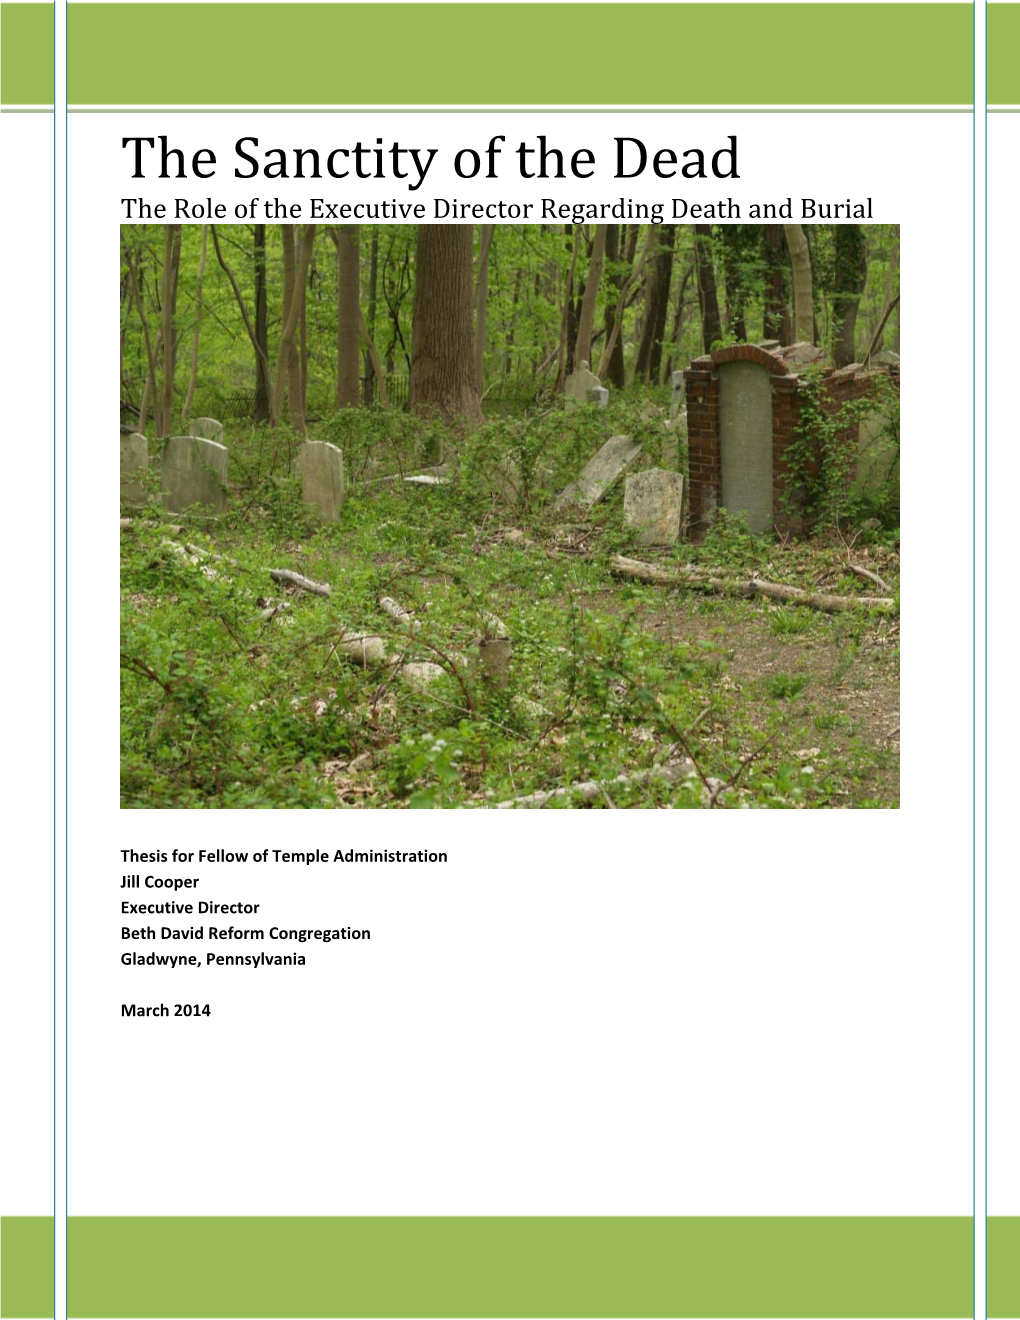 The Sanctity of the Dead the Role of the Executive Director Regarding Death and Burial